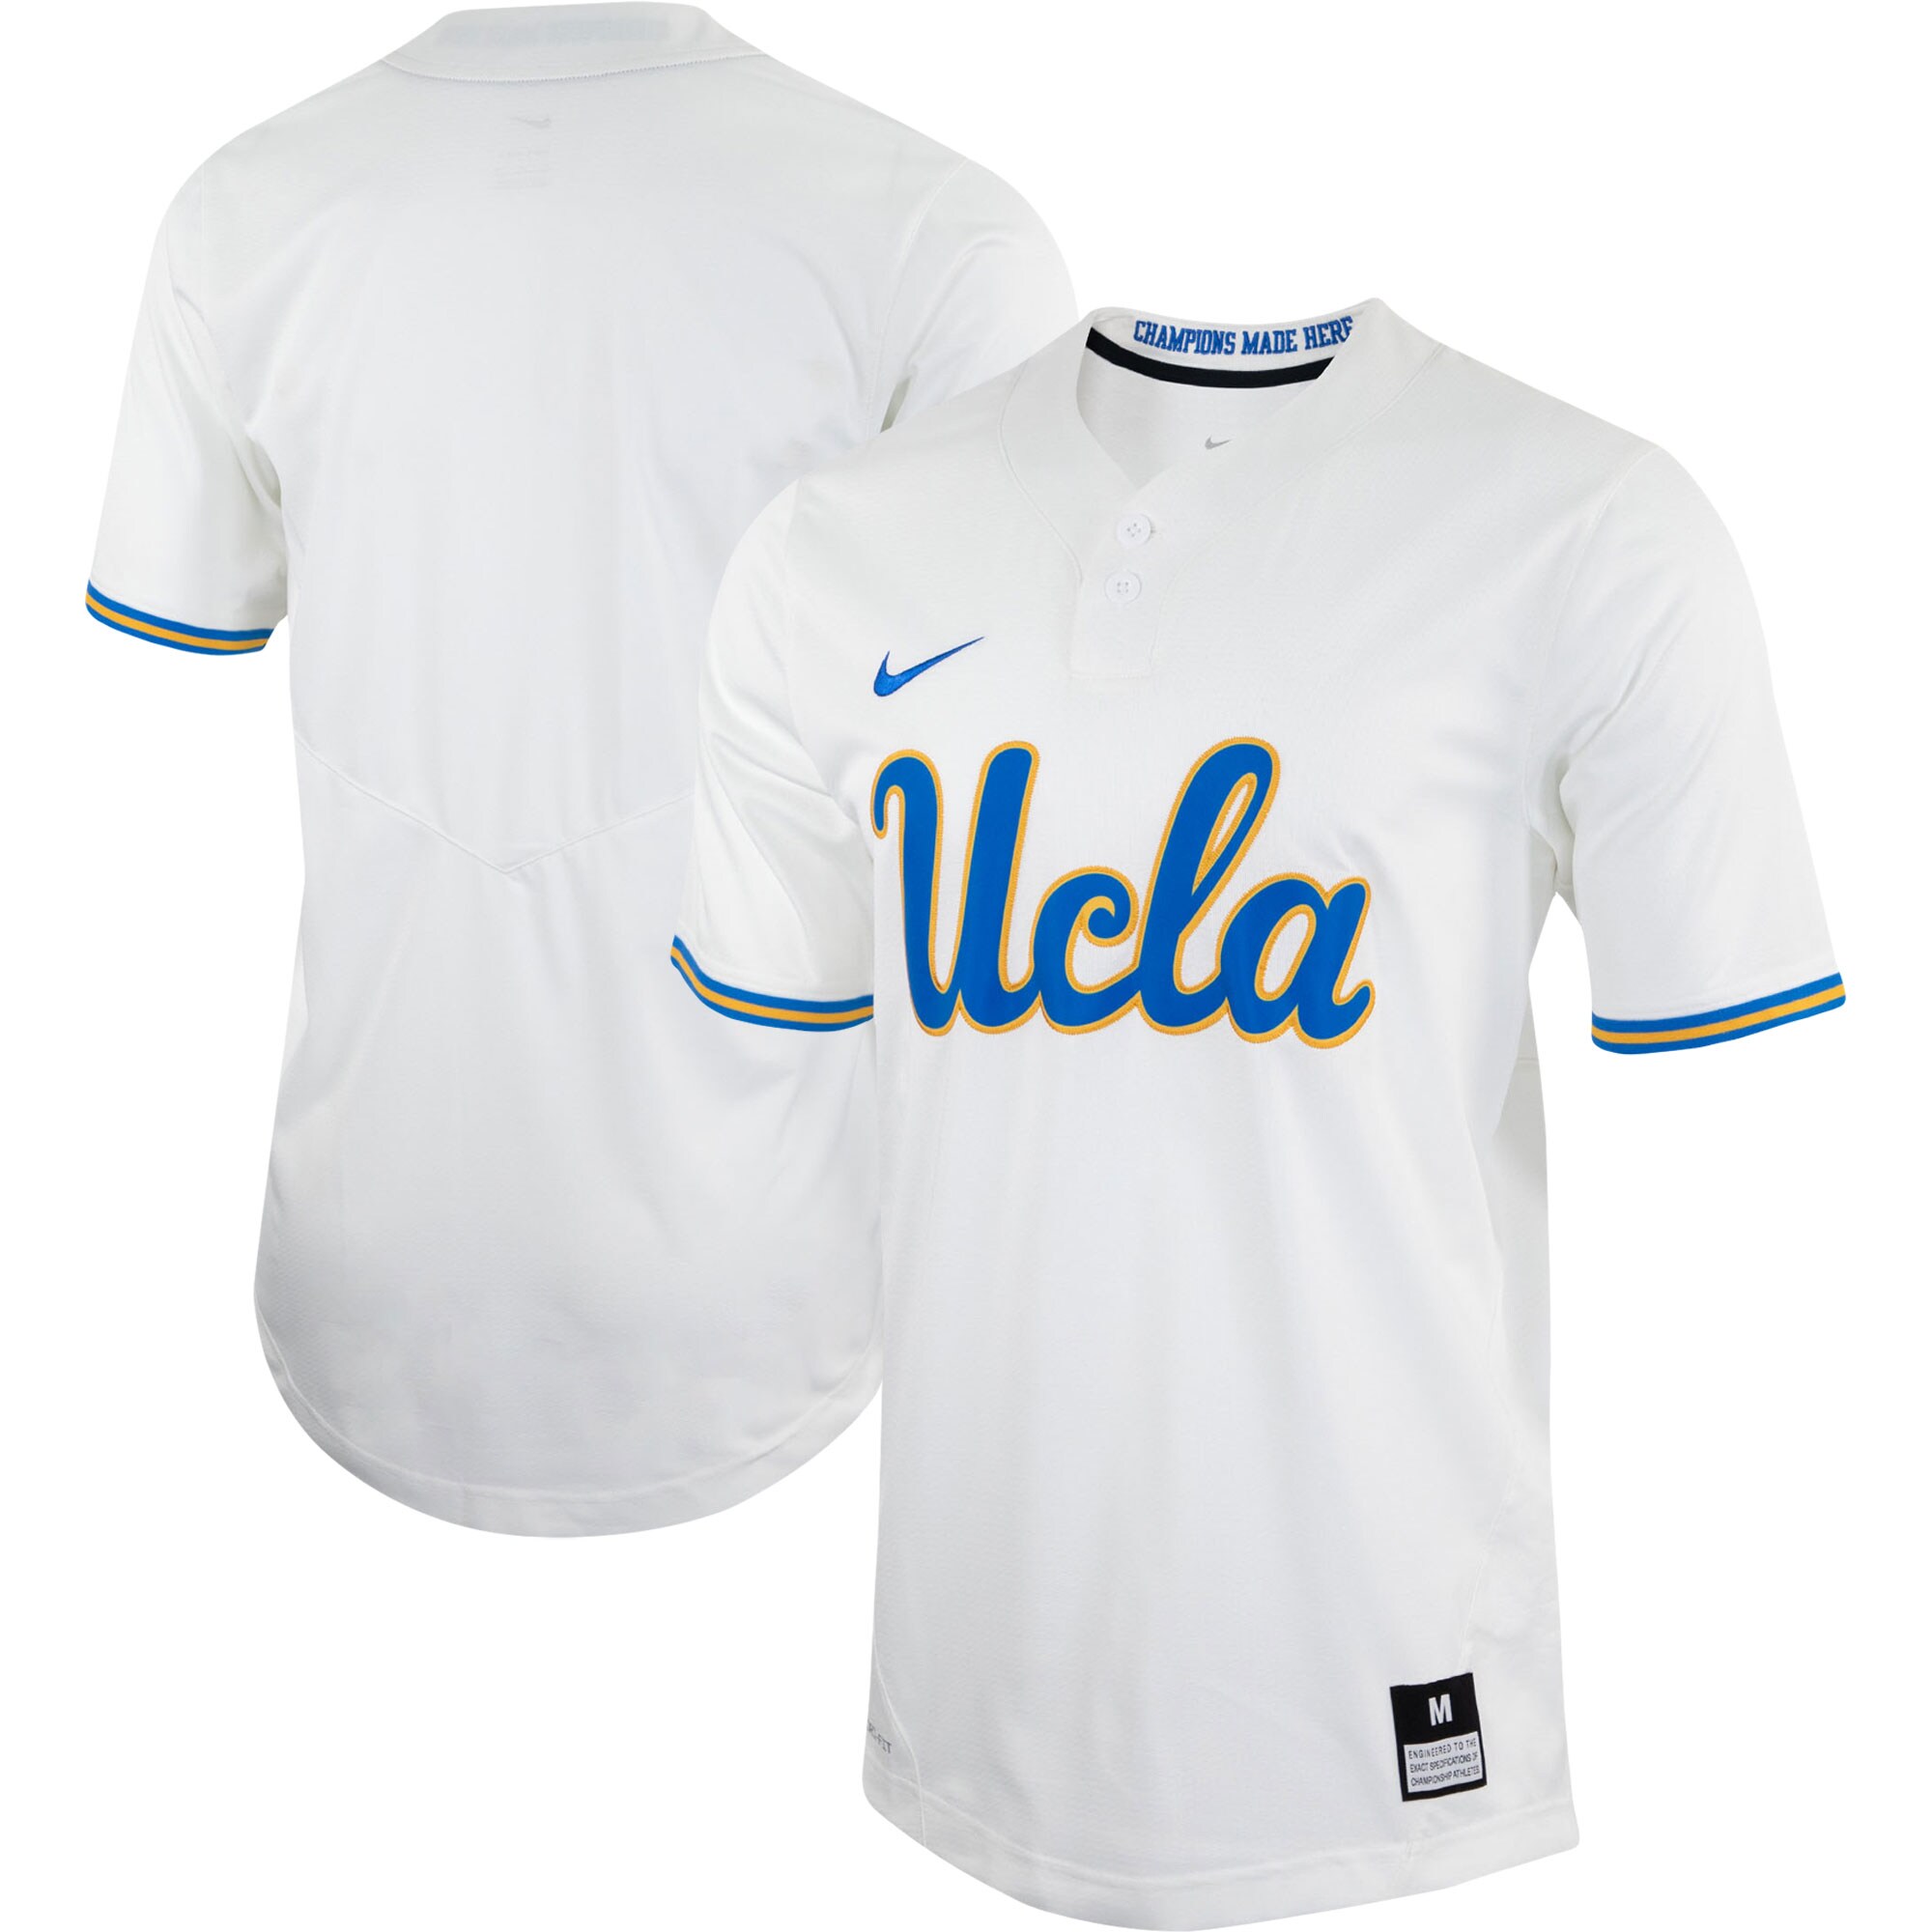 Ucla Bruins Unisex Two-Button Replica Softball Jersey - White For Youth Women Men